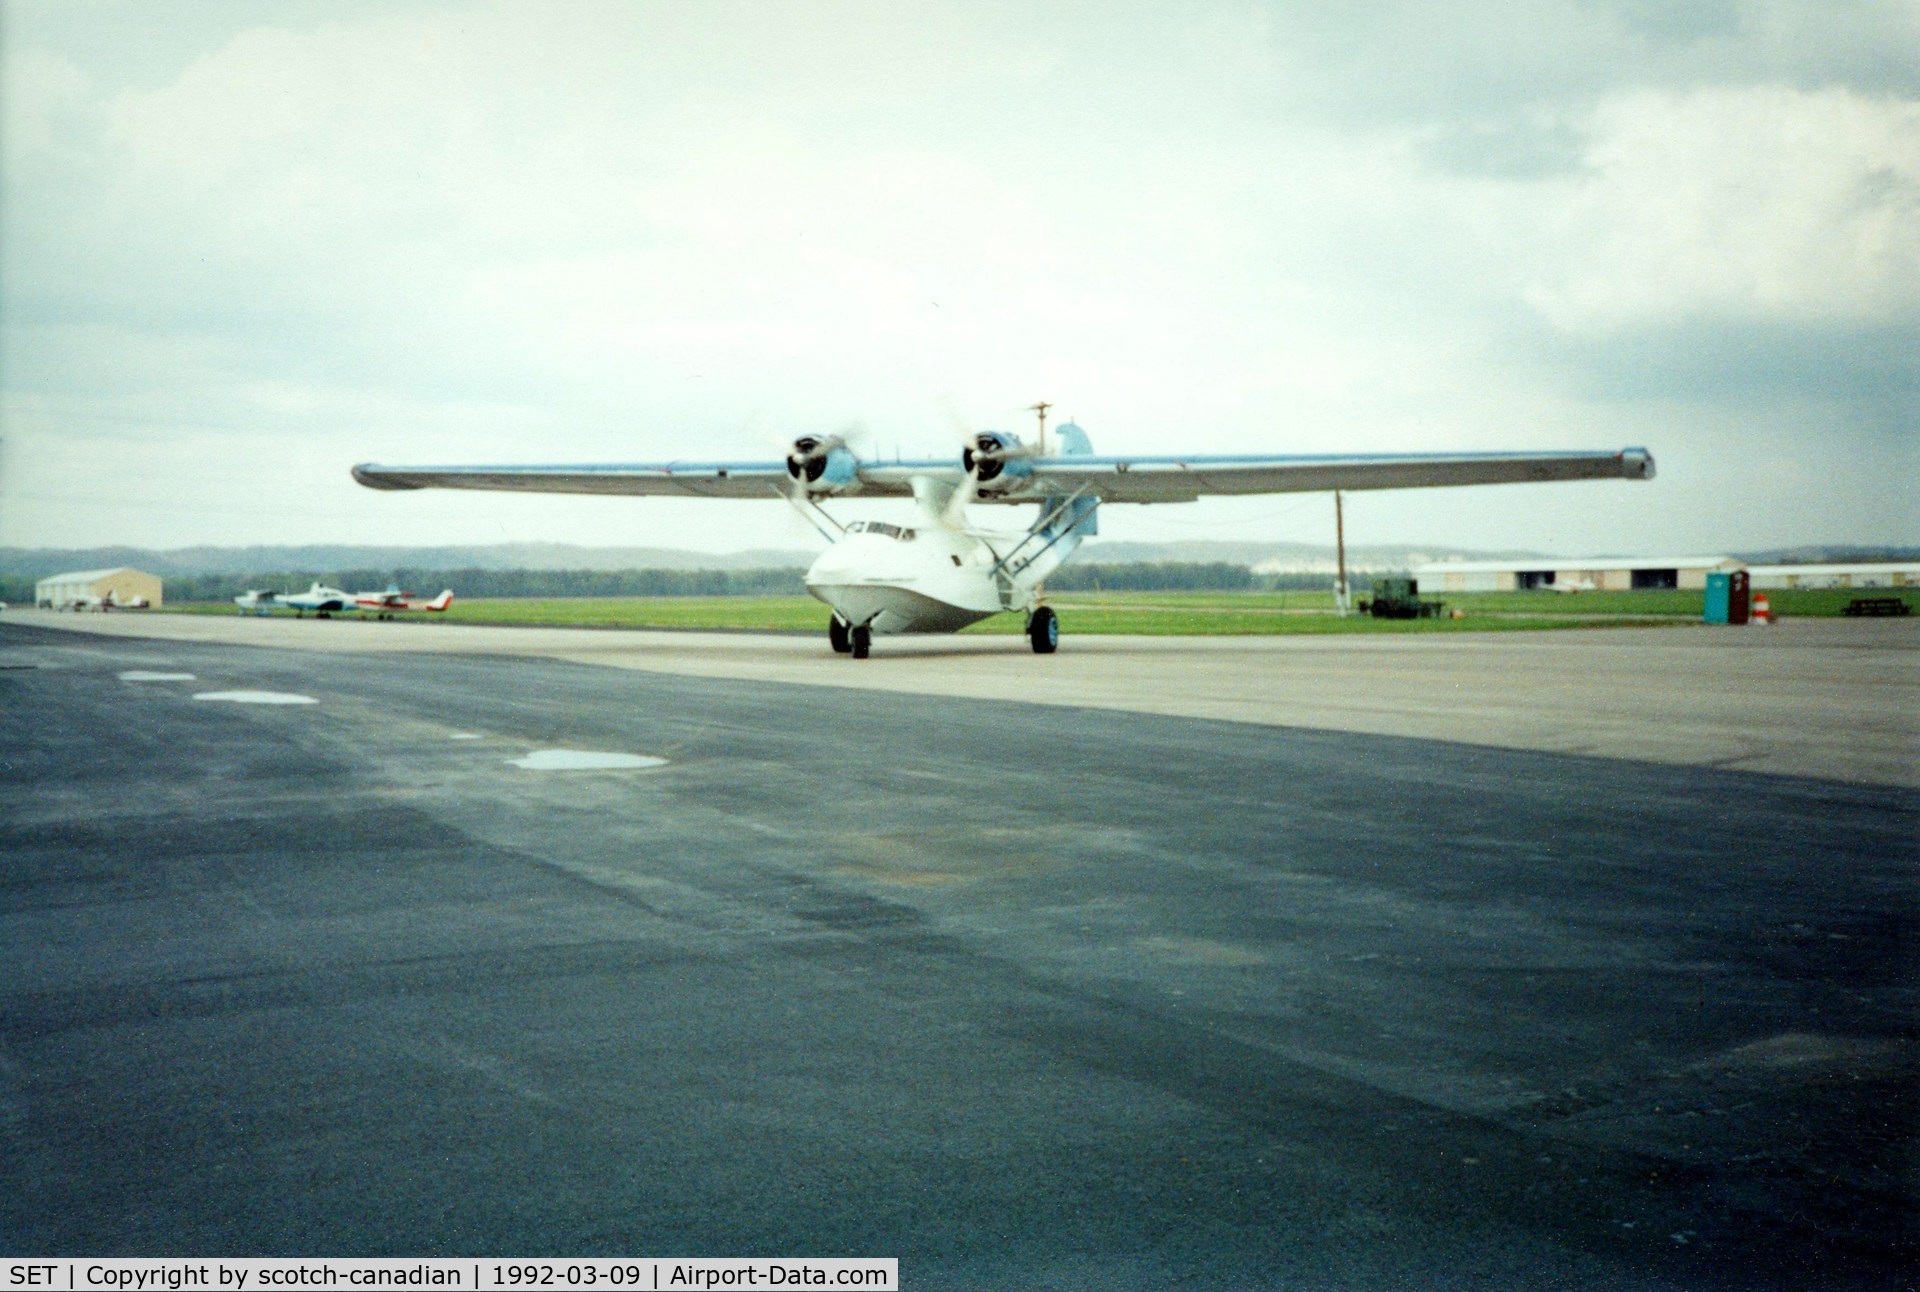 St Charles County Smartt Airport (SET) - PBY Catalina at St. Charles County Smartt Airport, St. Charles, MO. In 1992 this airfield's FAA identifier was 3SZ.